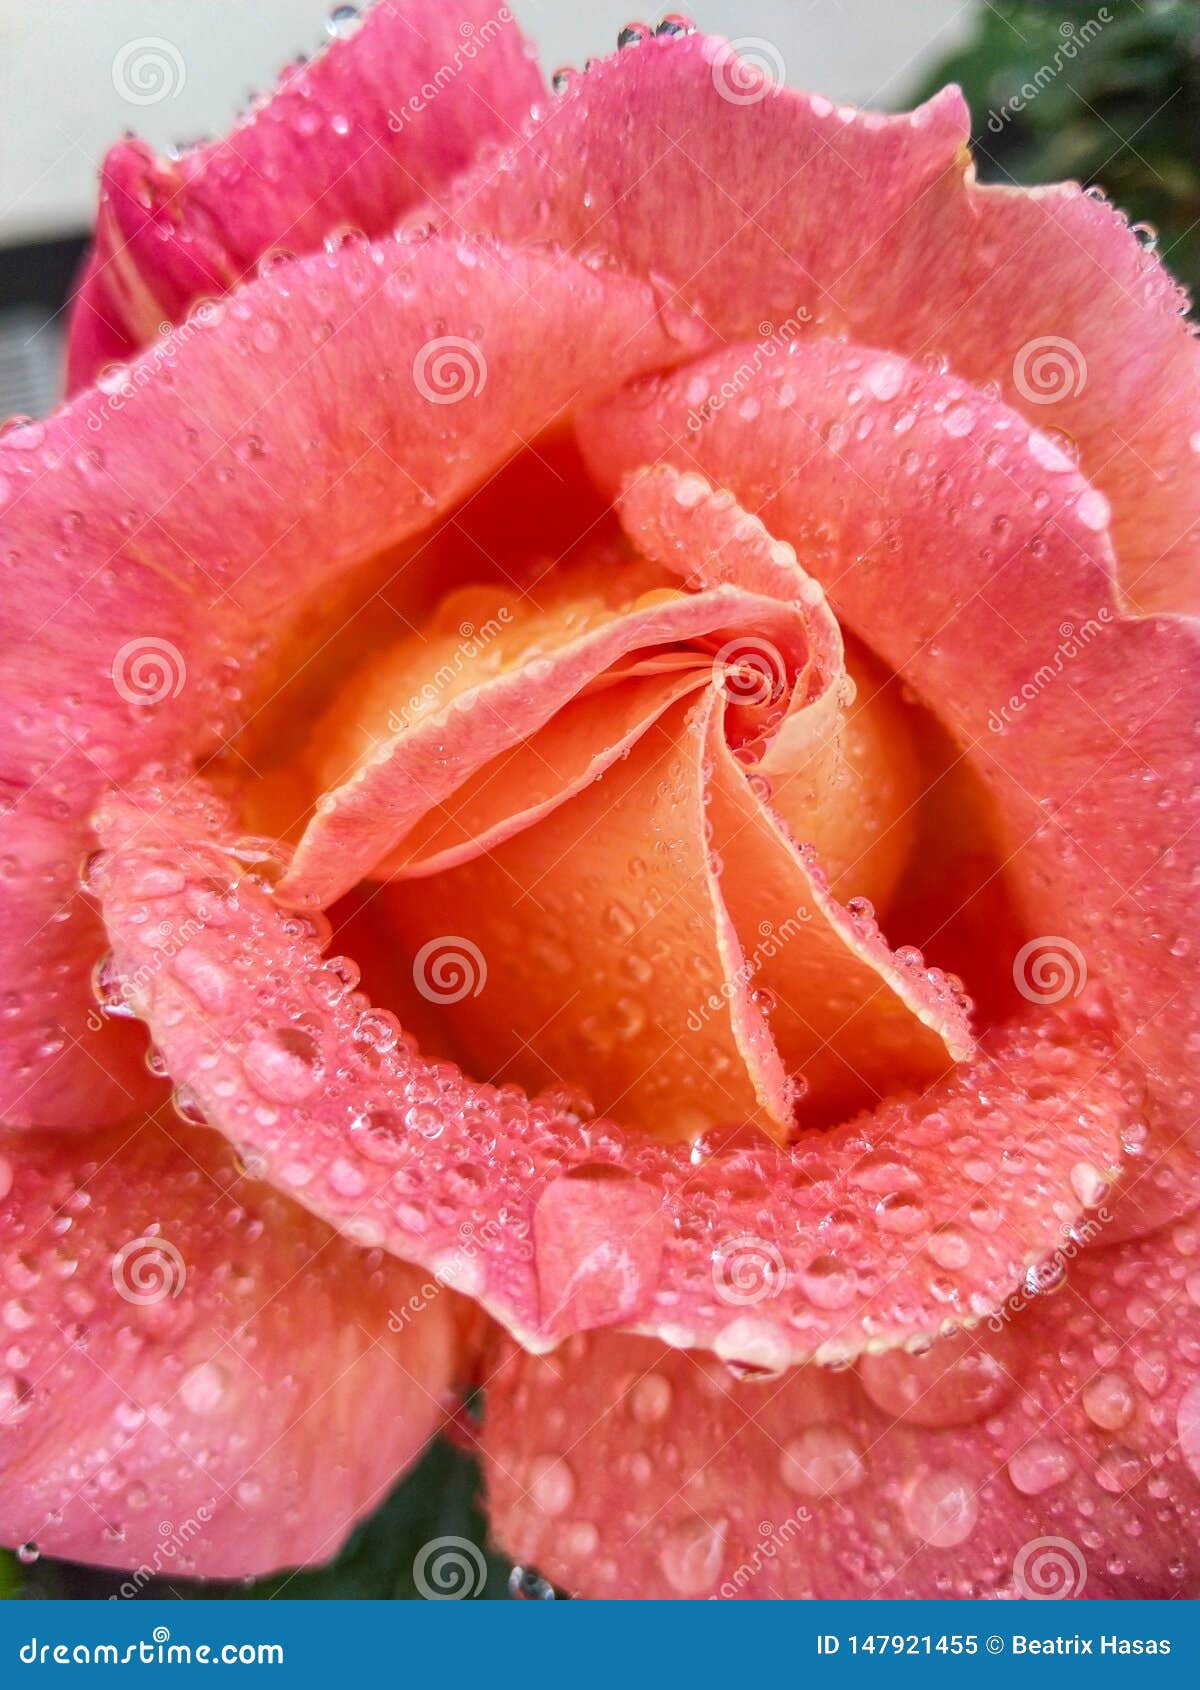 raindrops at the roses are amazing